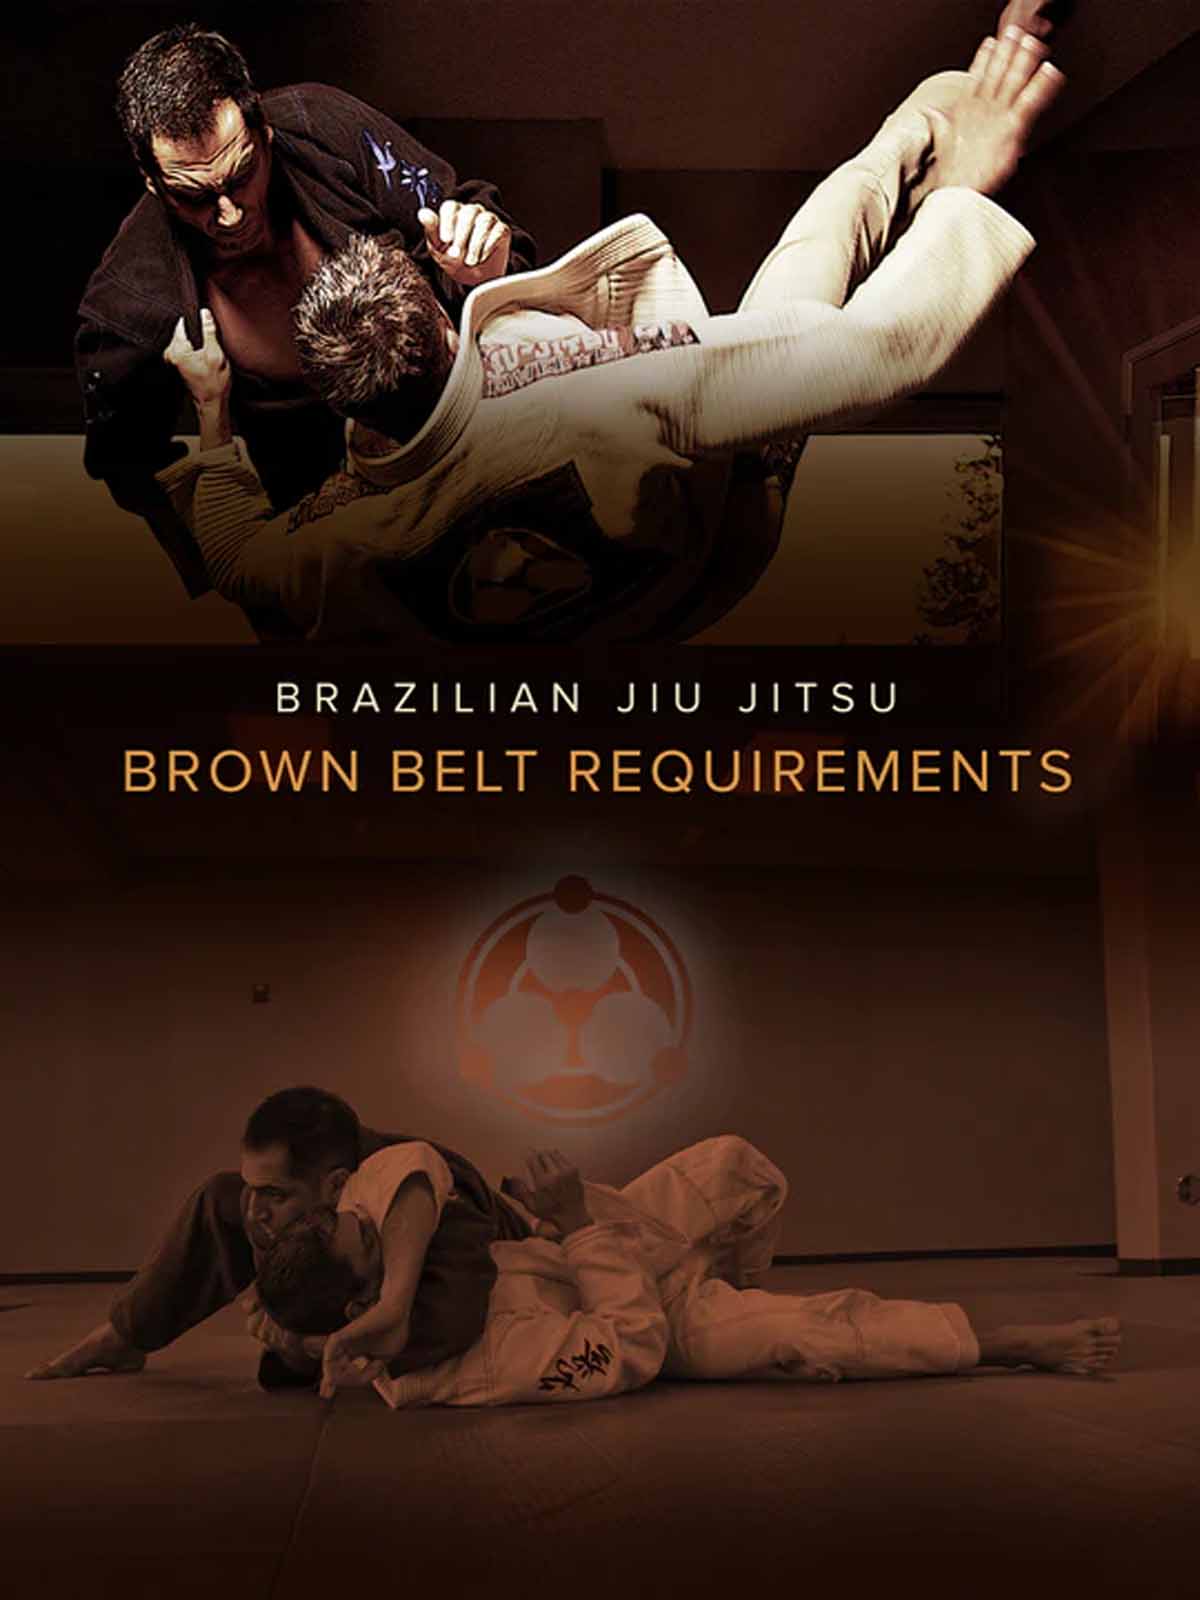 Doctor of Physical Therapy and BJJ Black Belt Reviews The Iron